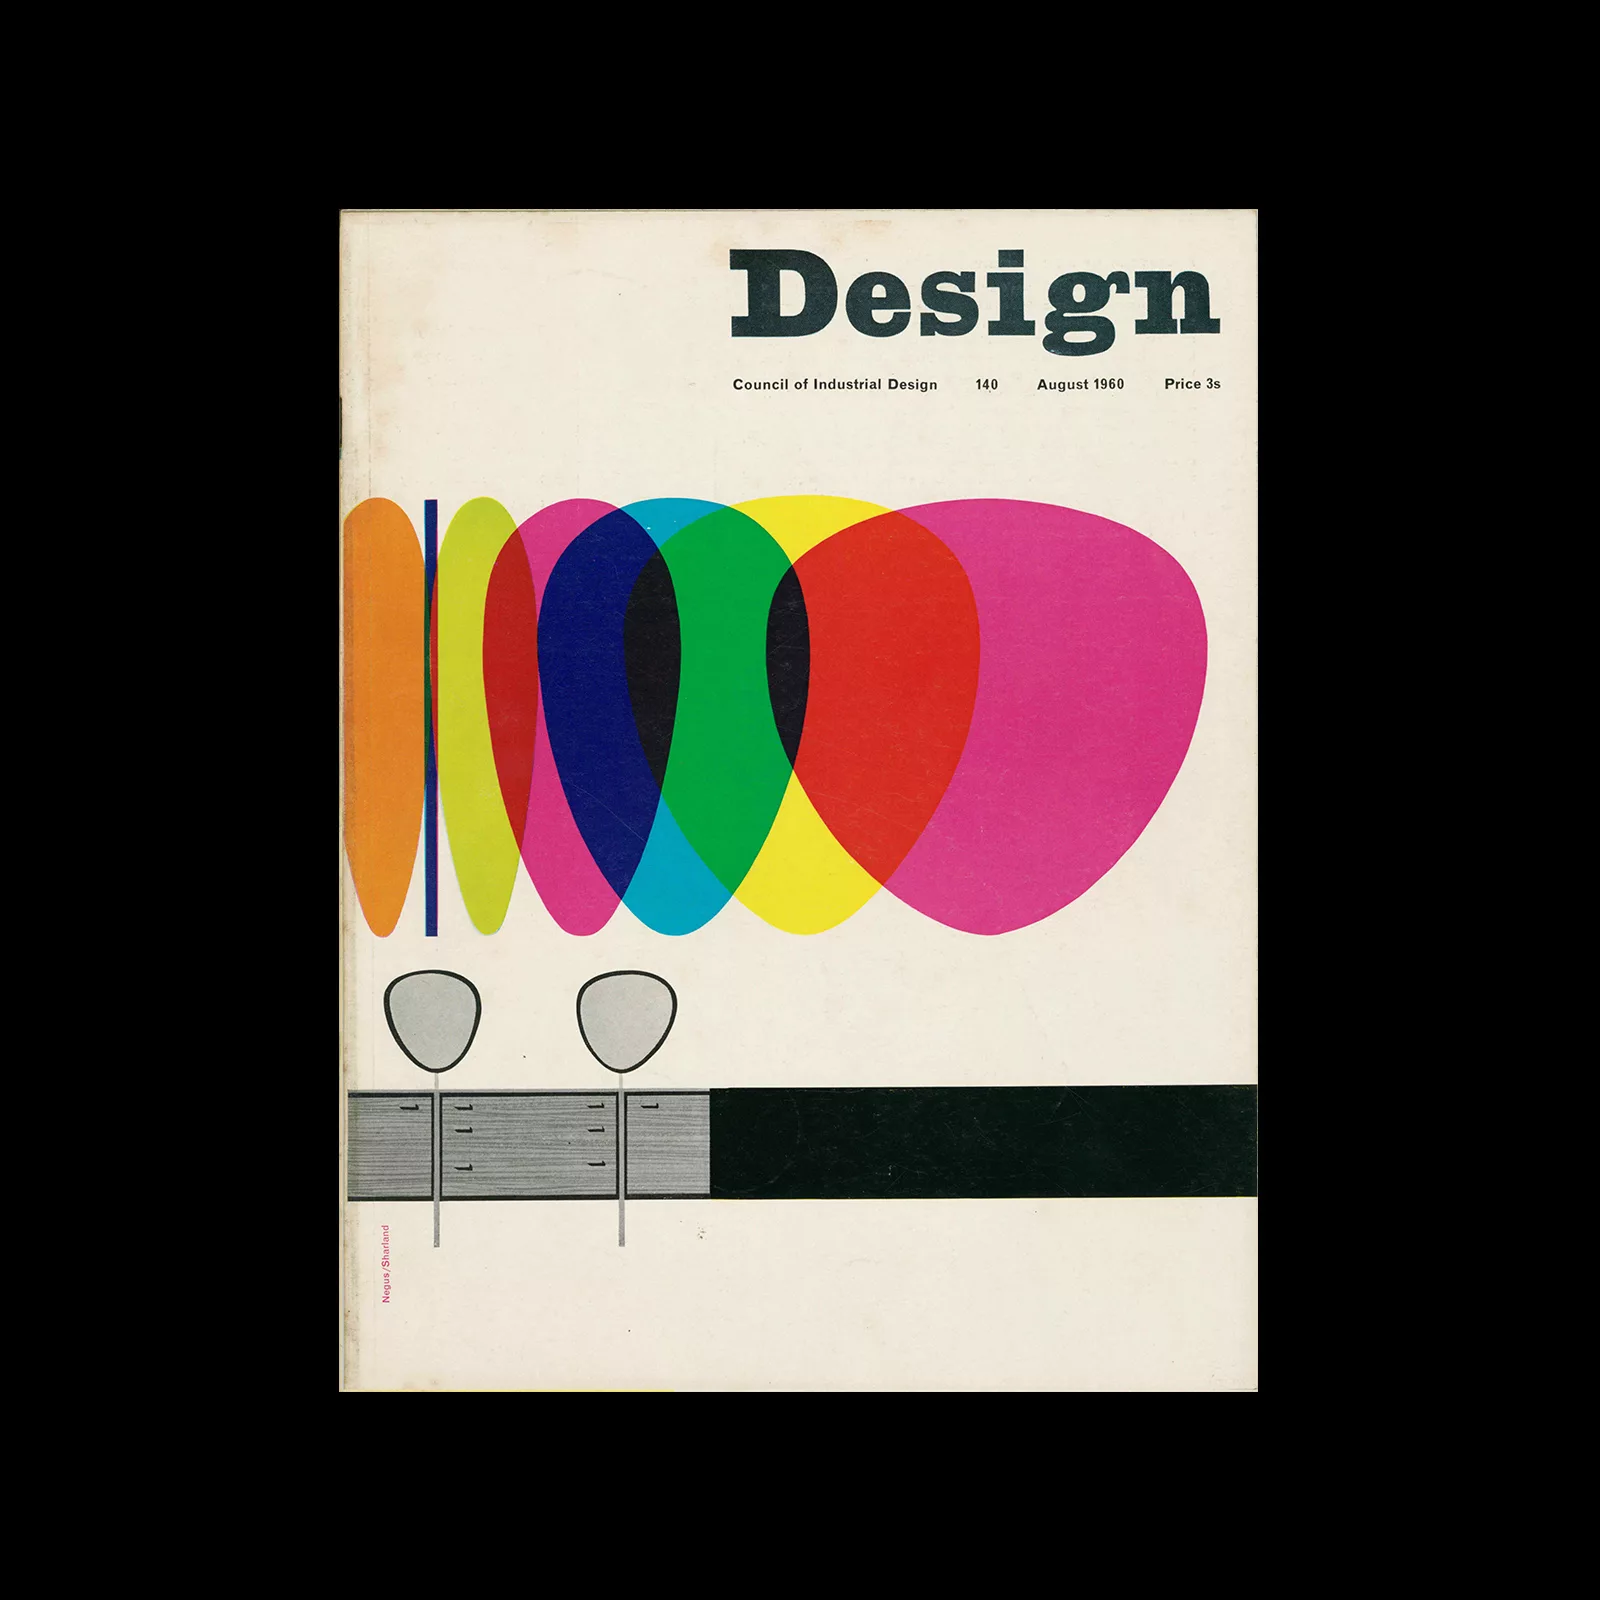 Design, Council of Industrial Design, 140, August 1960. Cover design by Negus/Sharland